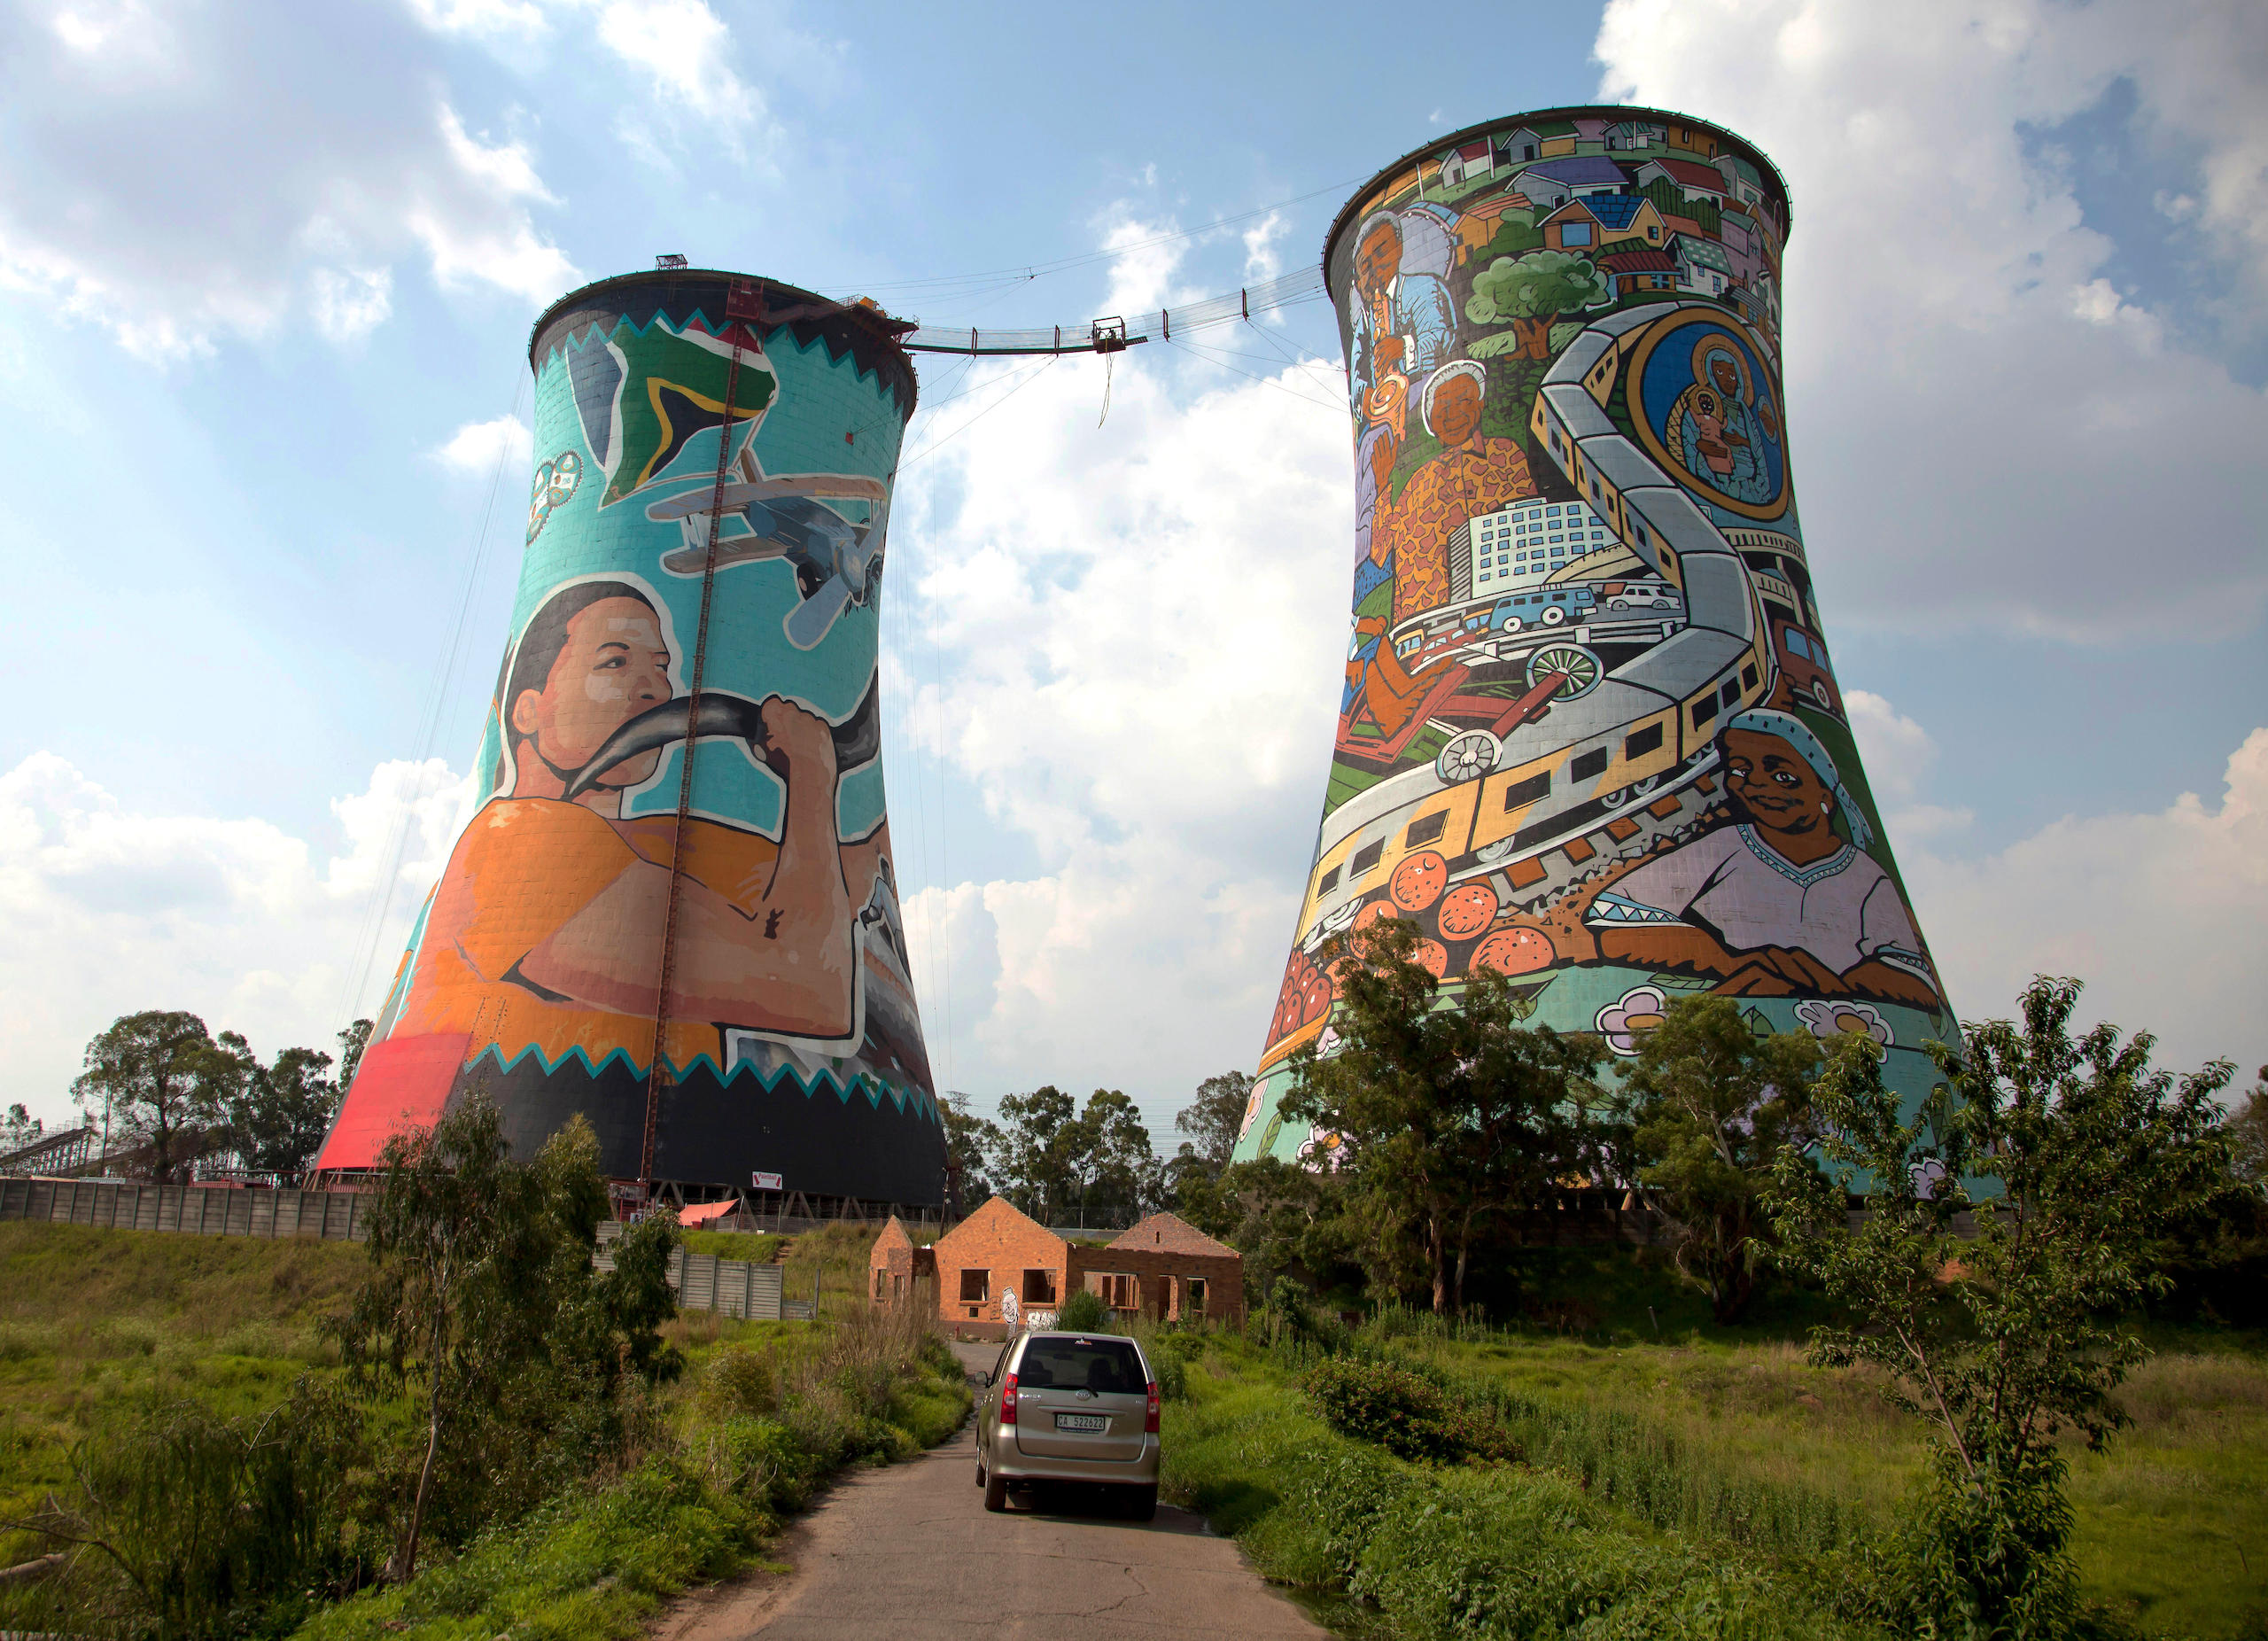 Decommissioned cooling towers of the Orlando coal power station in Soweto, South Africa. Like China, the country is heavily dependent on coal for its electricity supply and faces the challenge of ensuring the switch to renewables is fair for workers in the fossil fuel industry. (Image: Peter Schickert/Alamy)